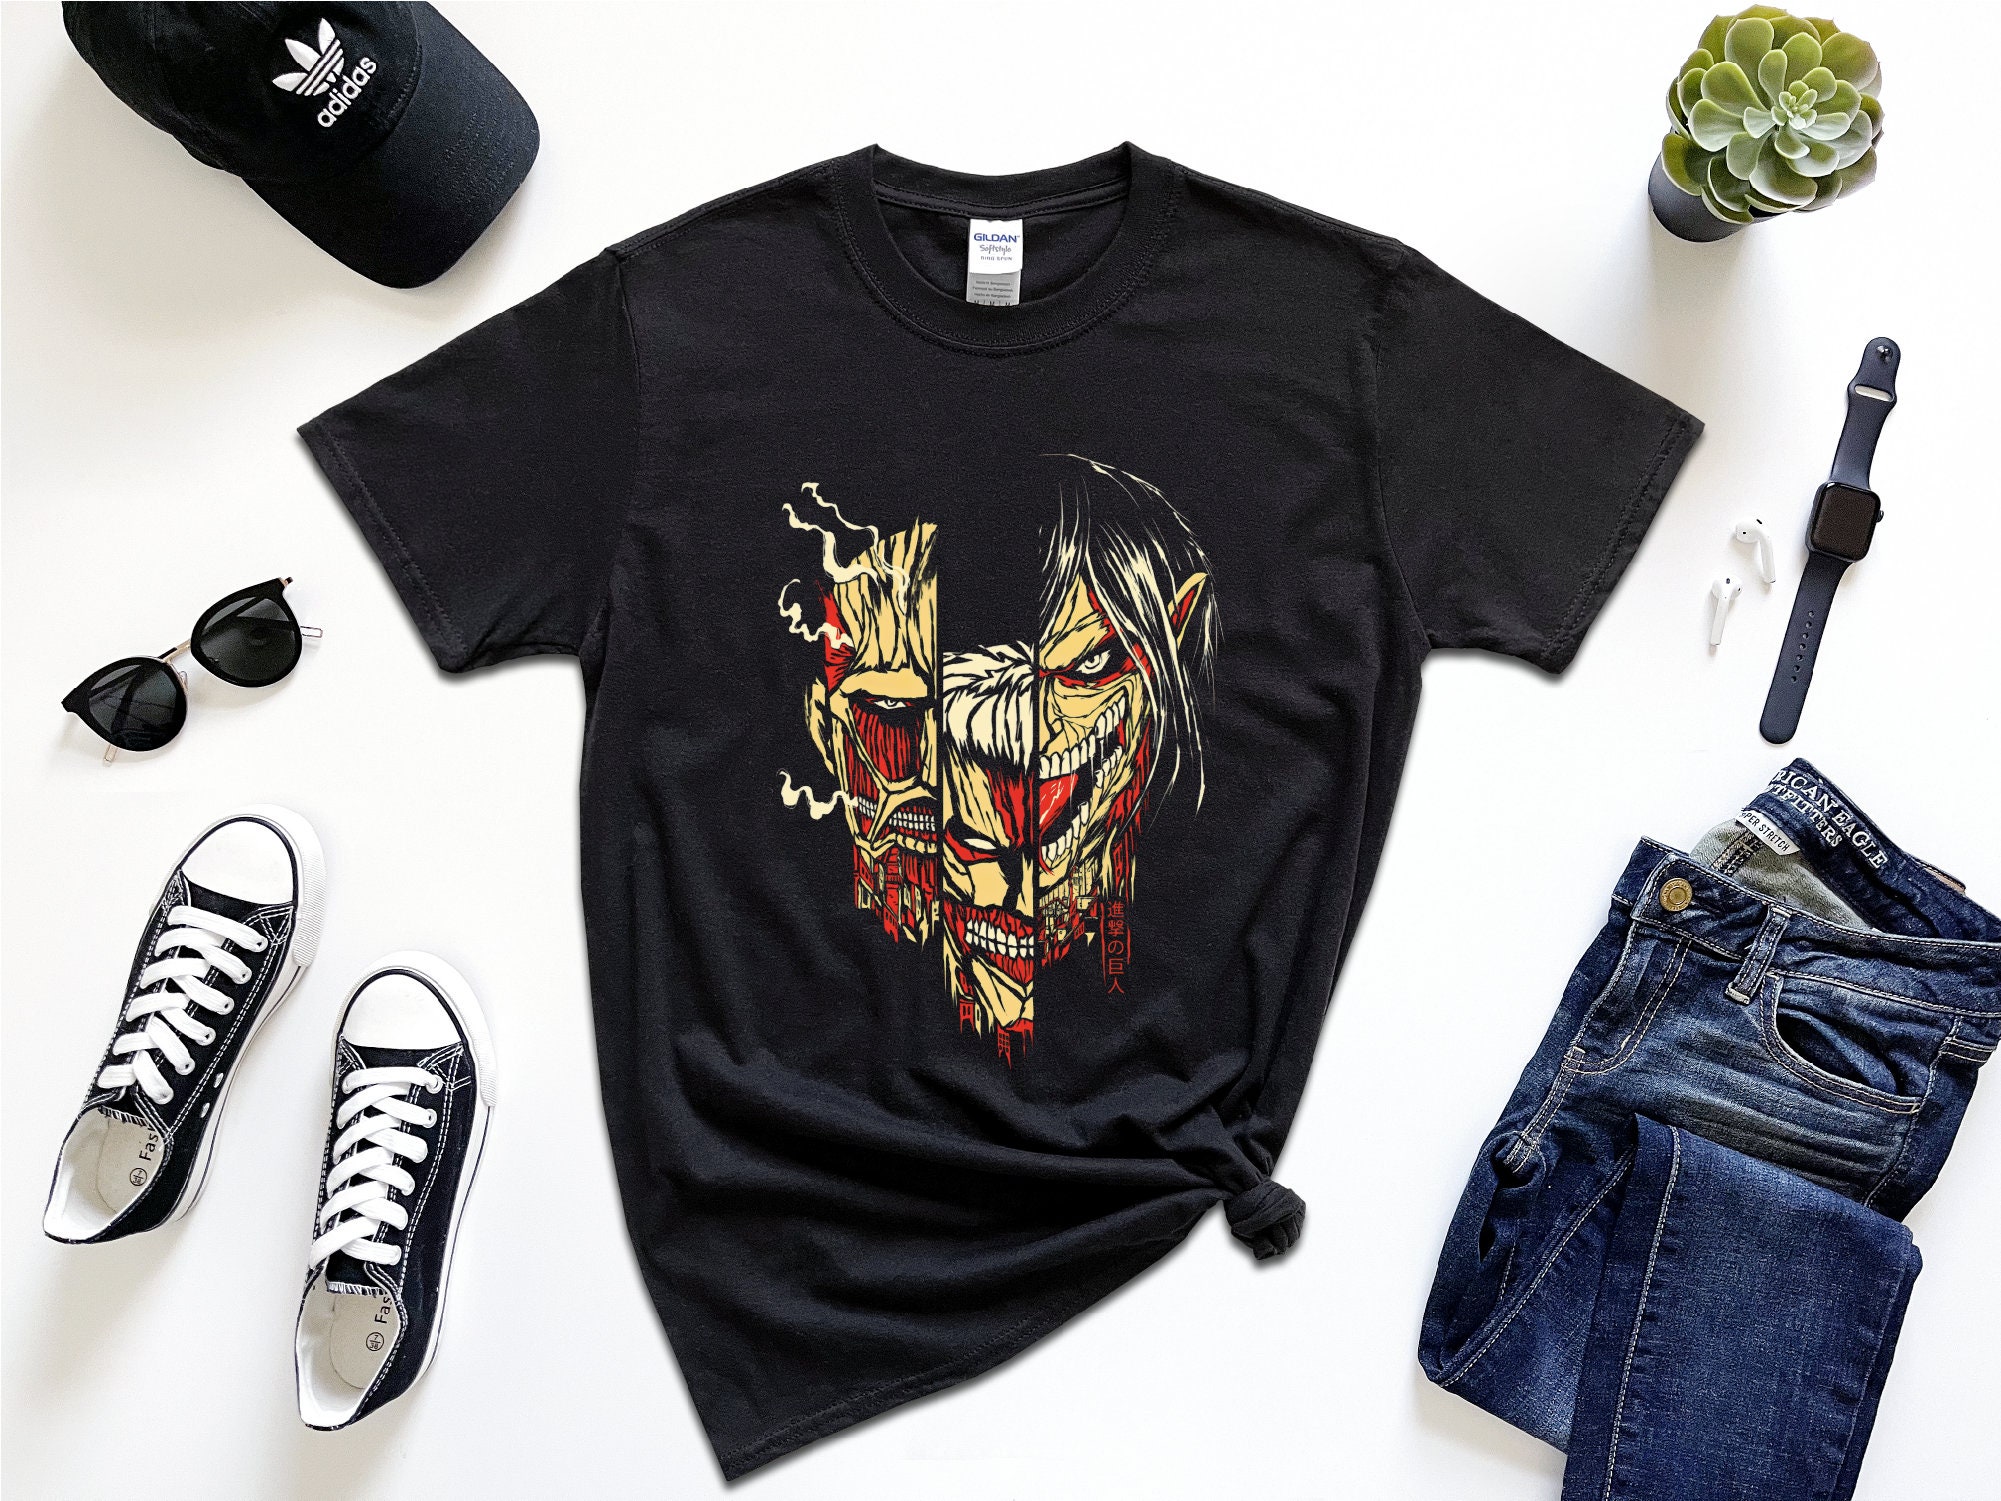 Discover Attack On Titan Vintage Asthetic T-Shirt